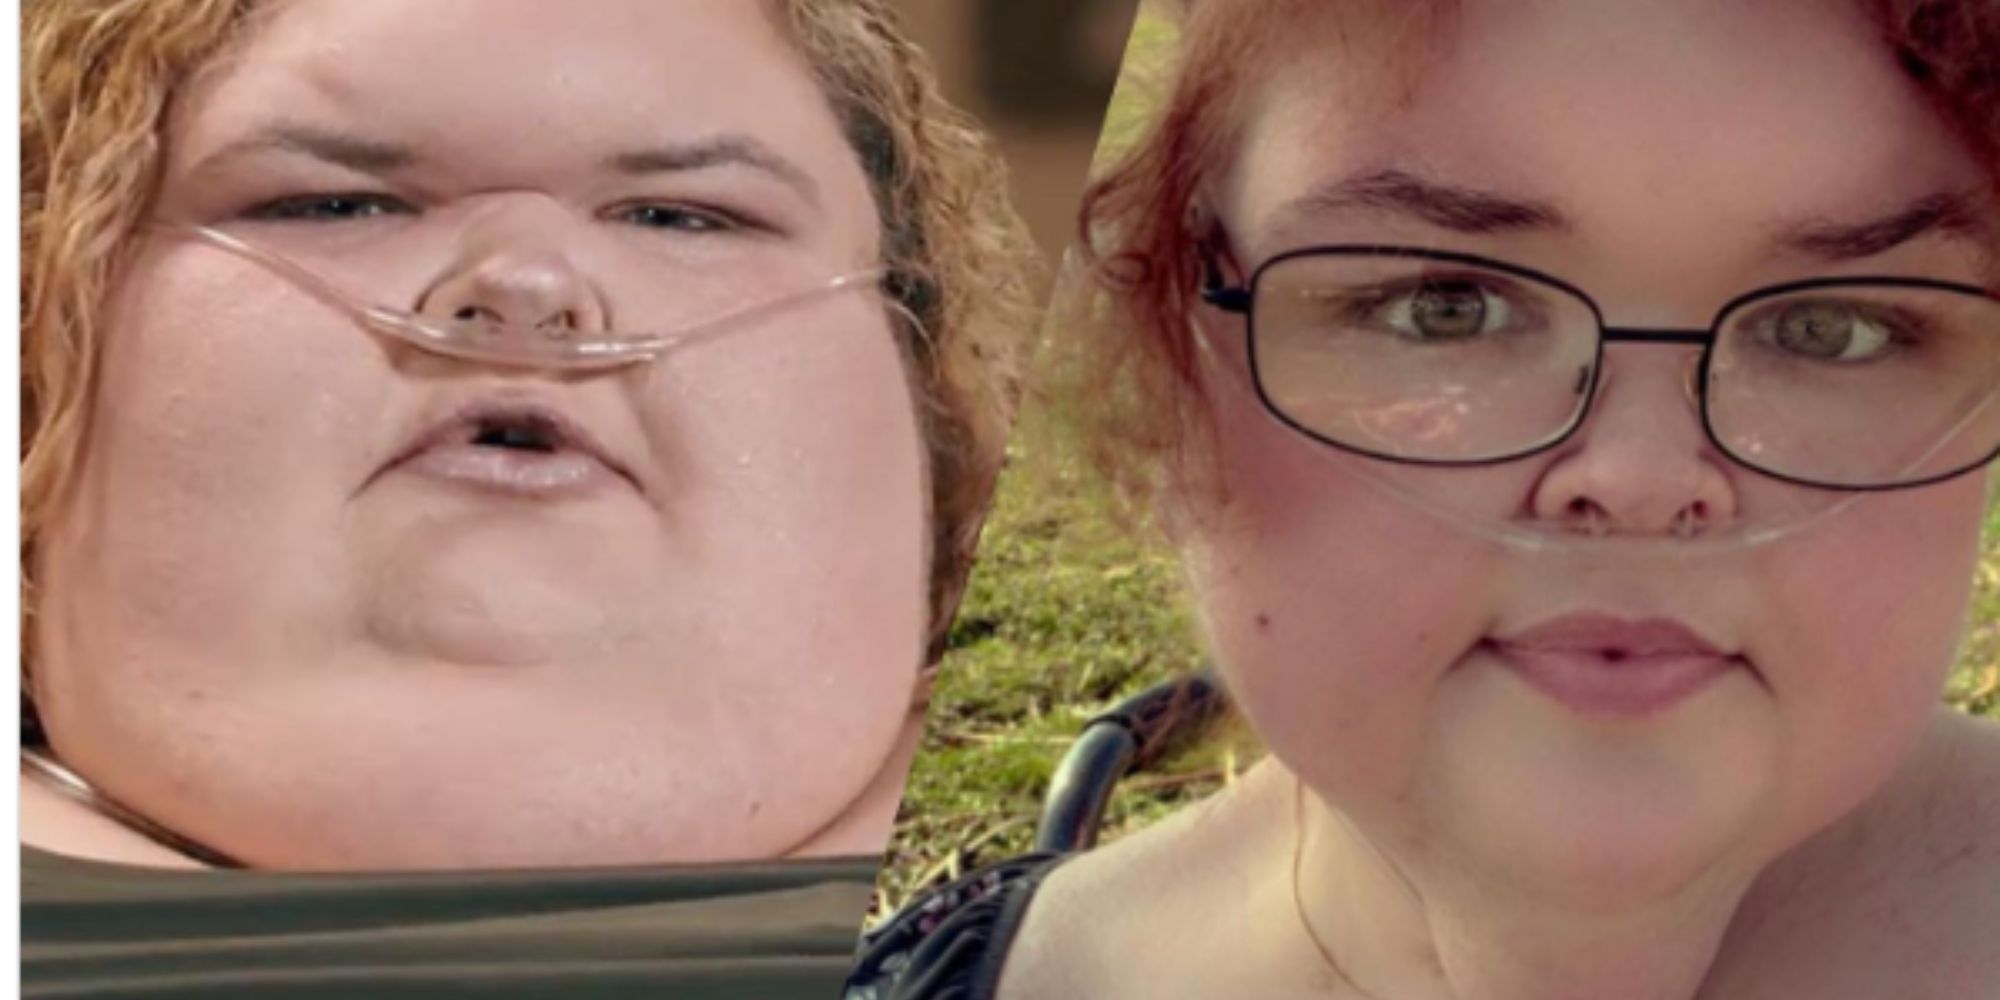 1000-lb sister tammy slaton before and after side by side split screen